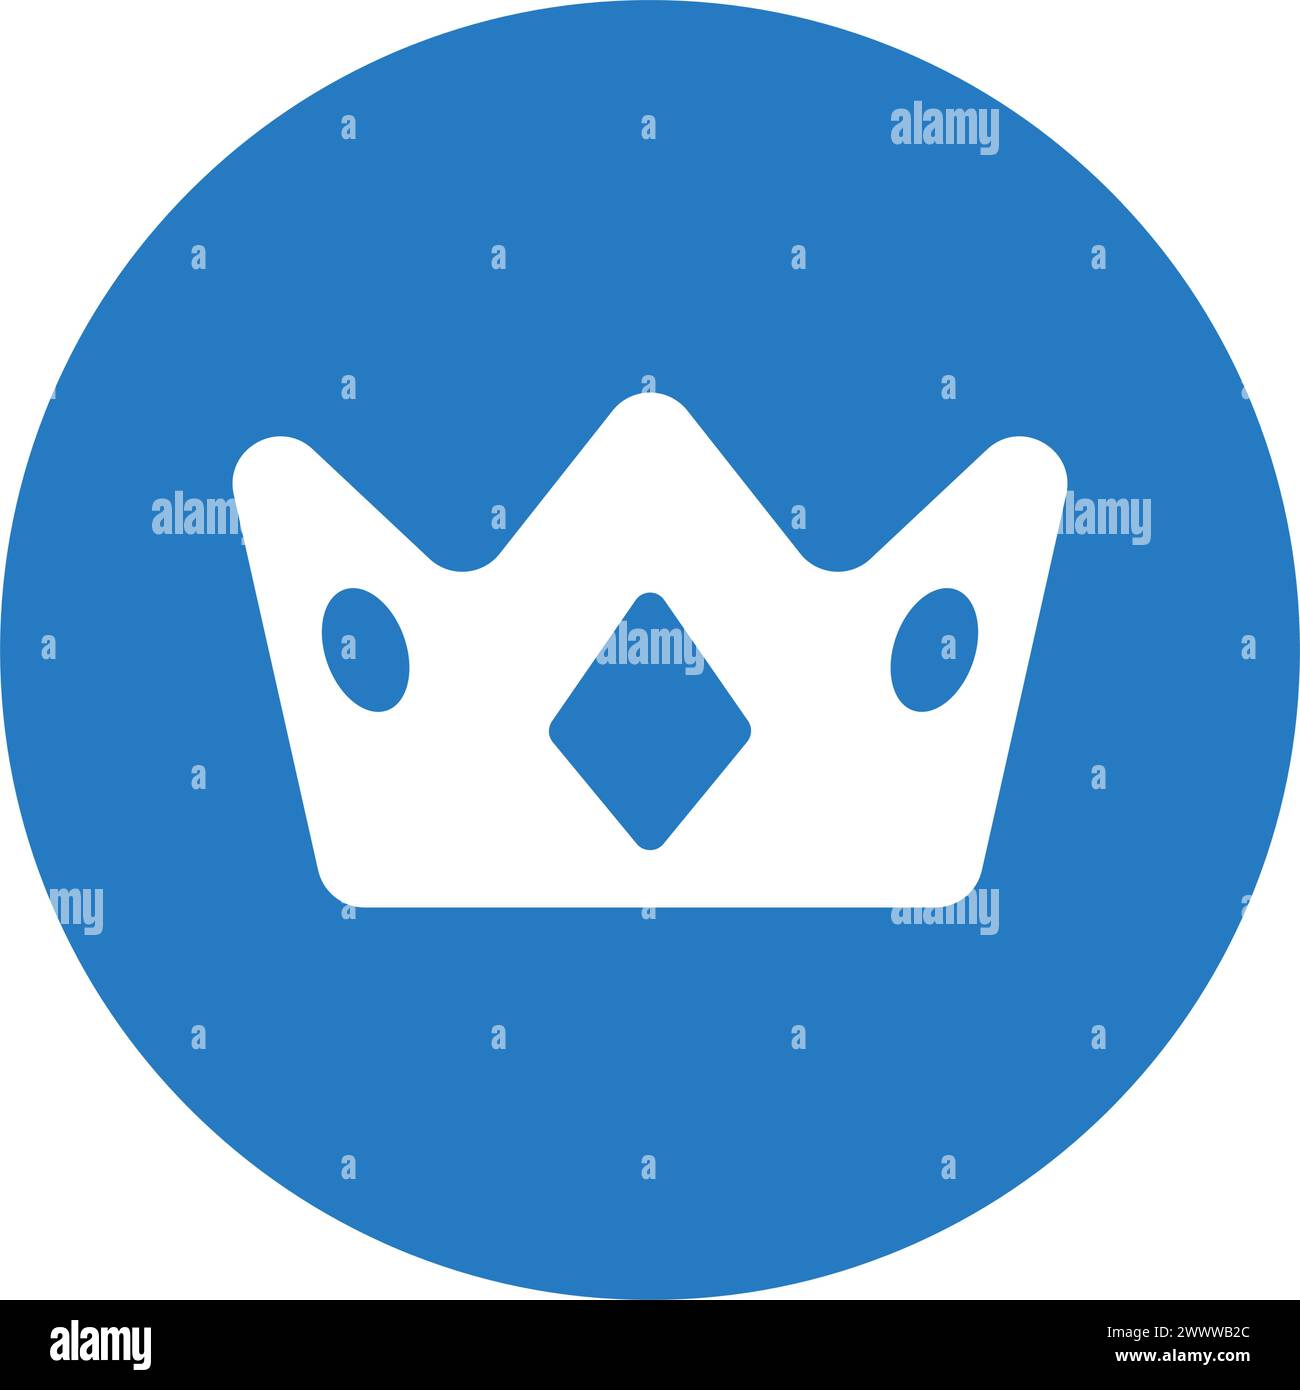 Crown, empire, king icon. Use for designing and developing websites, commercial purposes, print media, web or any type of design task. Stock Vector